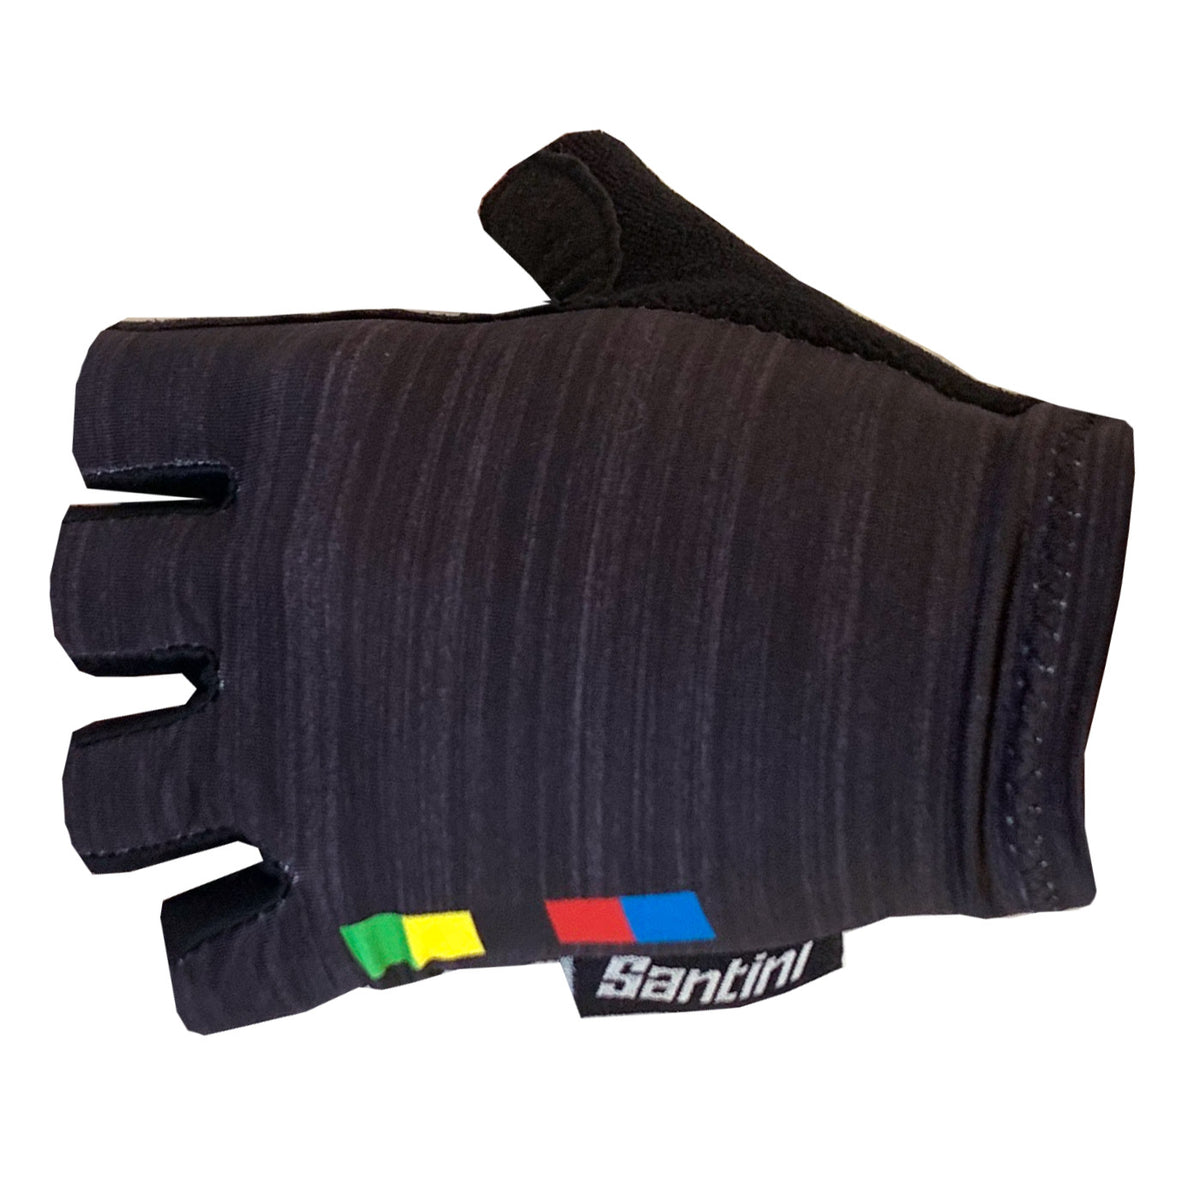 UCI Rainbow Cycling Gloves Light Blue Made in Italy by Santini 